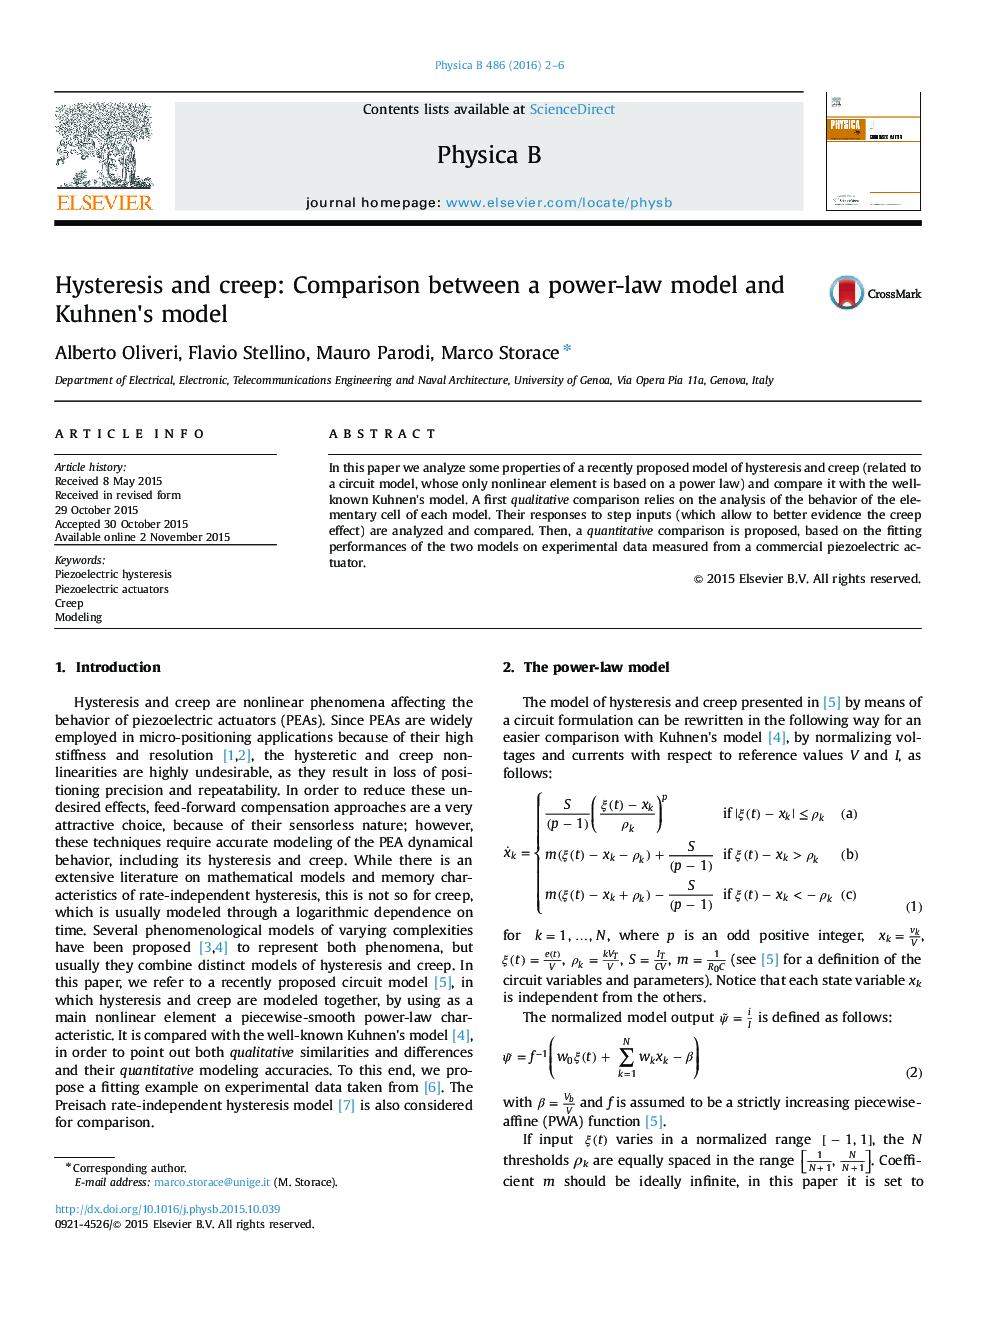 Hysteresis and creep: Comparison between a power-law model and Kuhnen's model